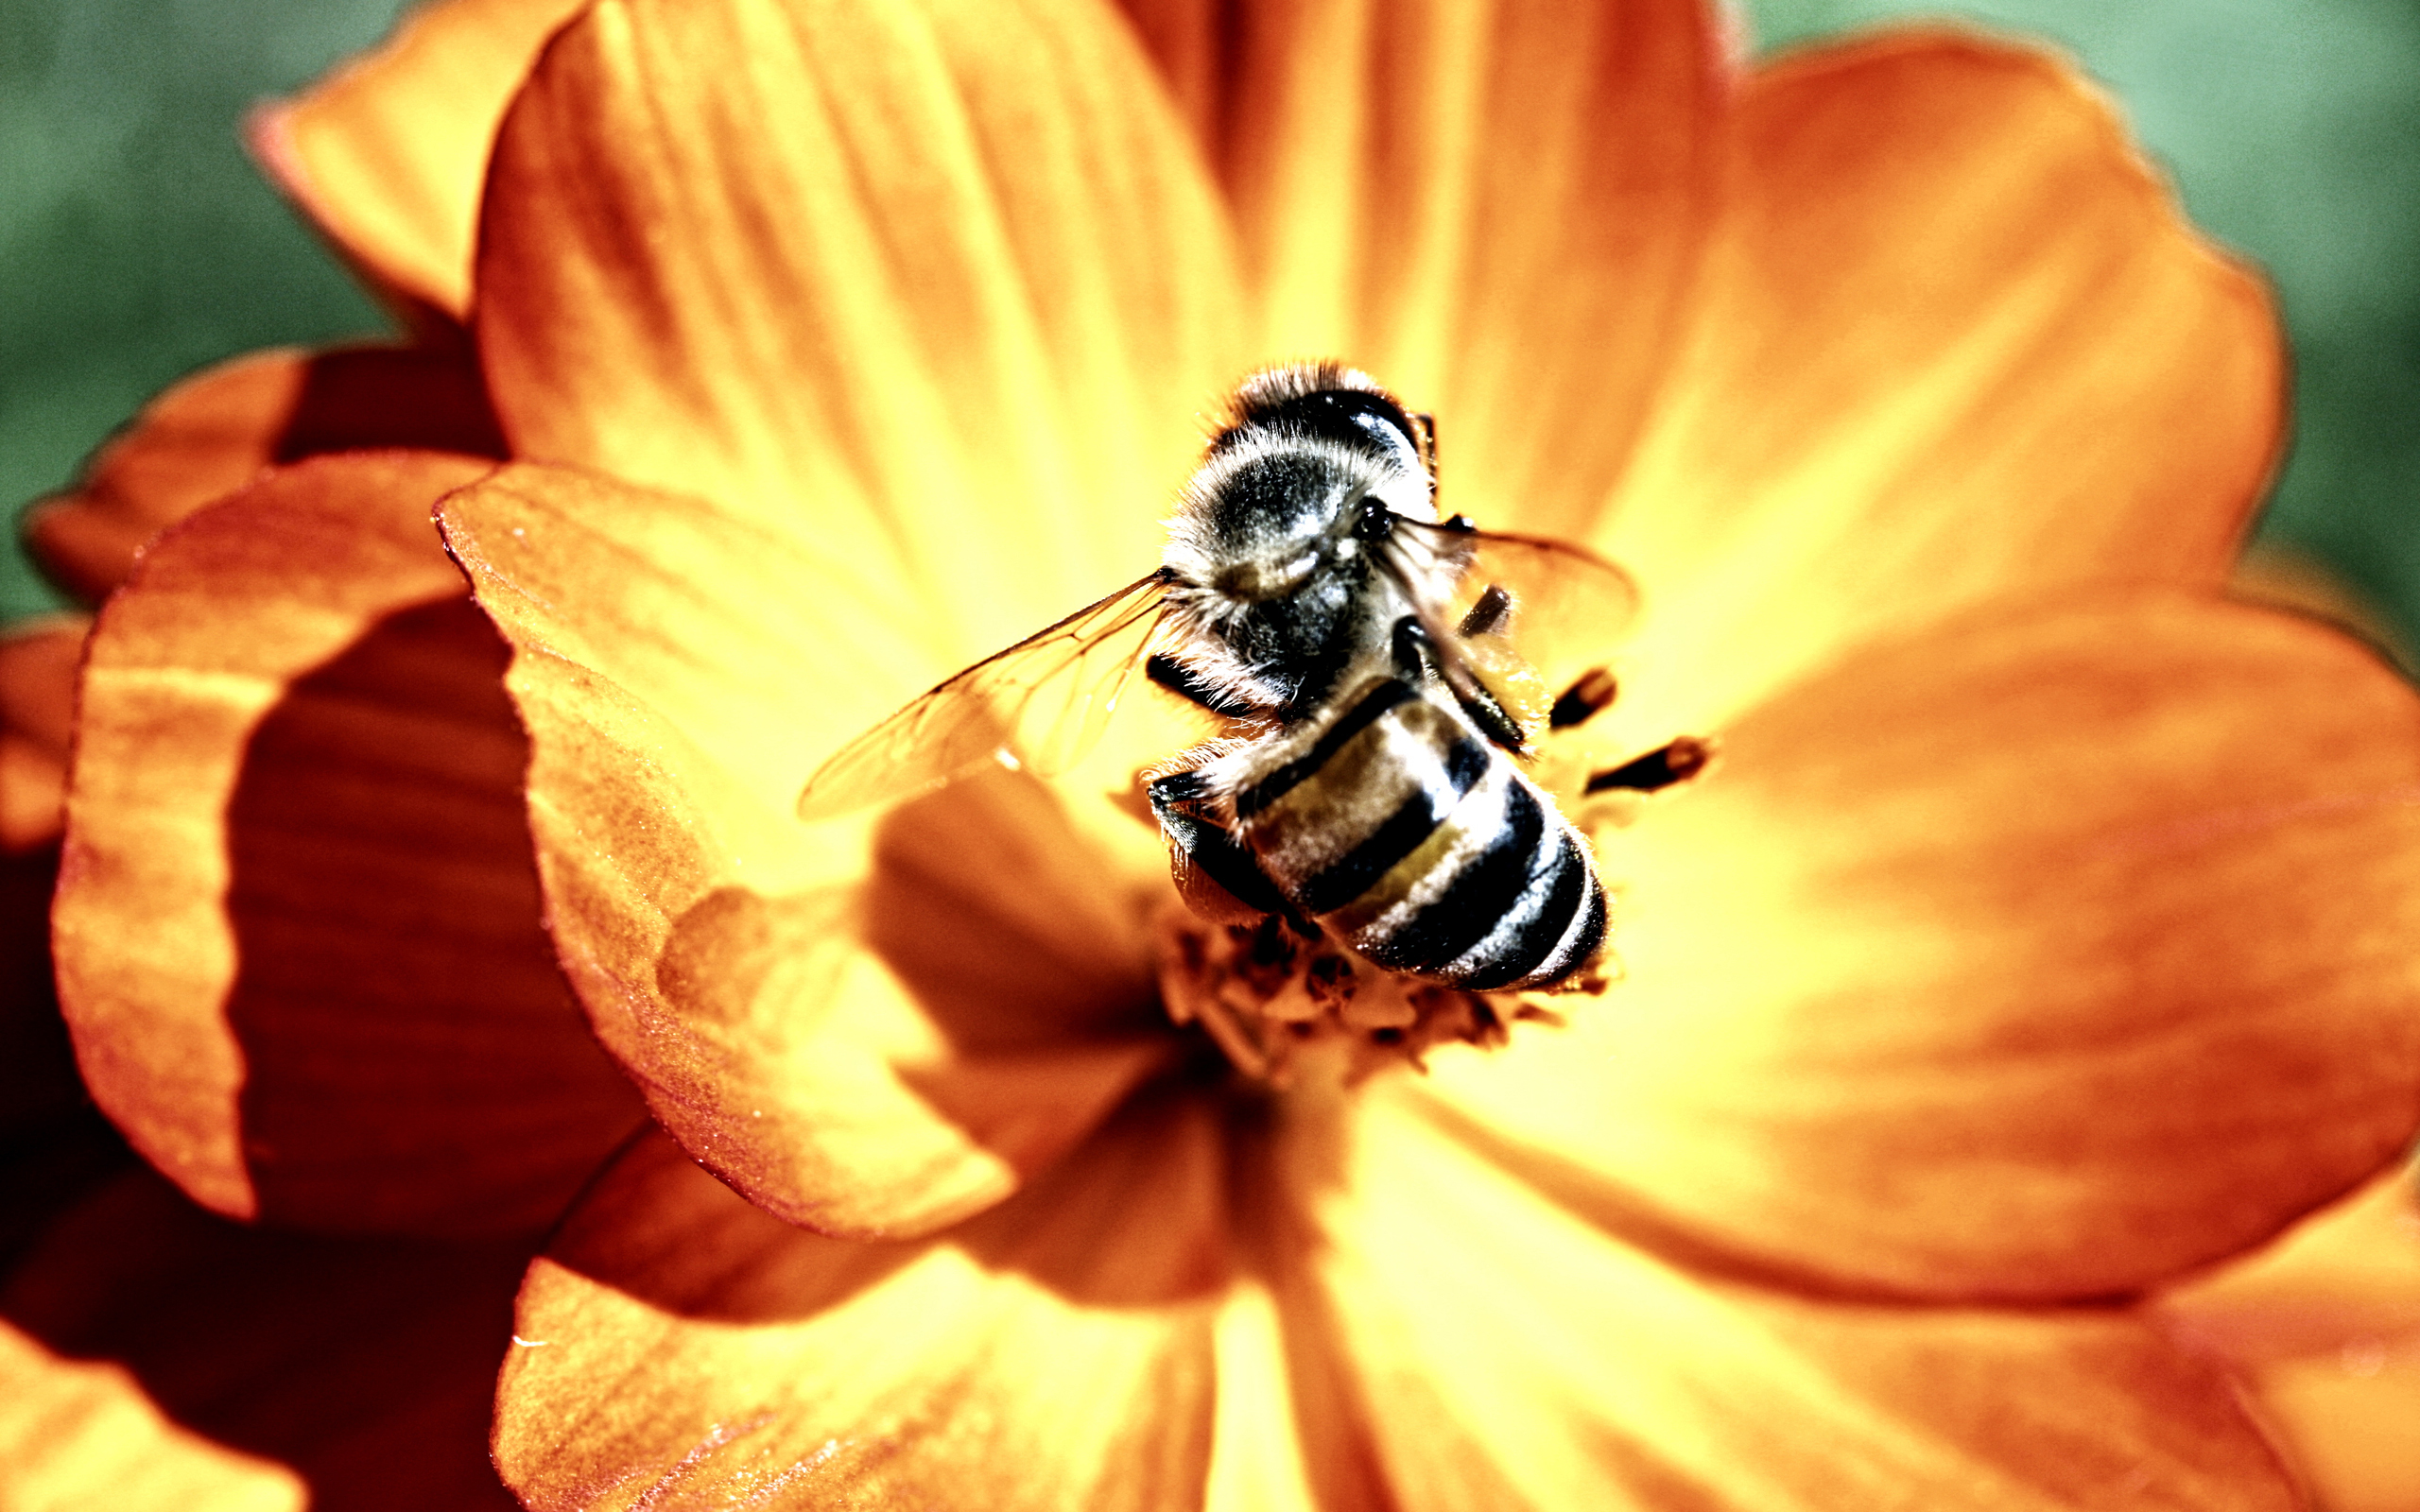 A close-up of a bee on a vibrant flower in macro detail.